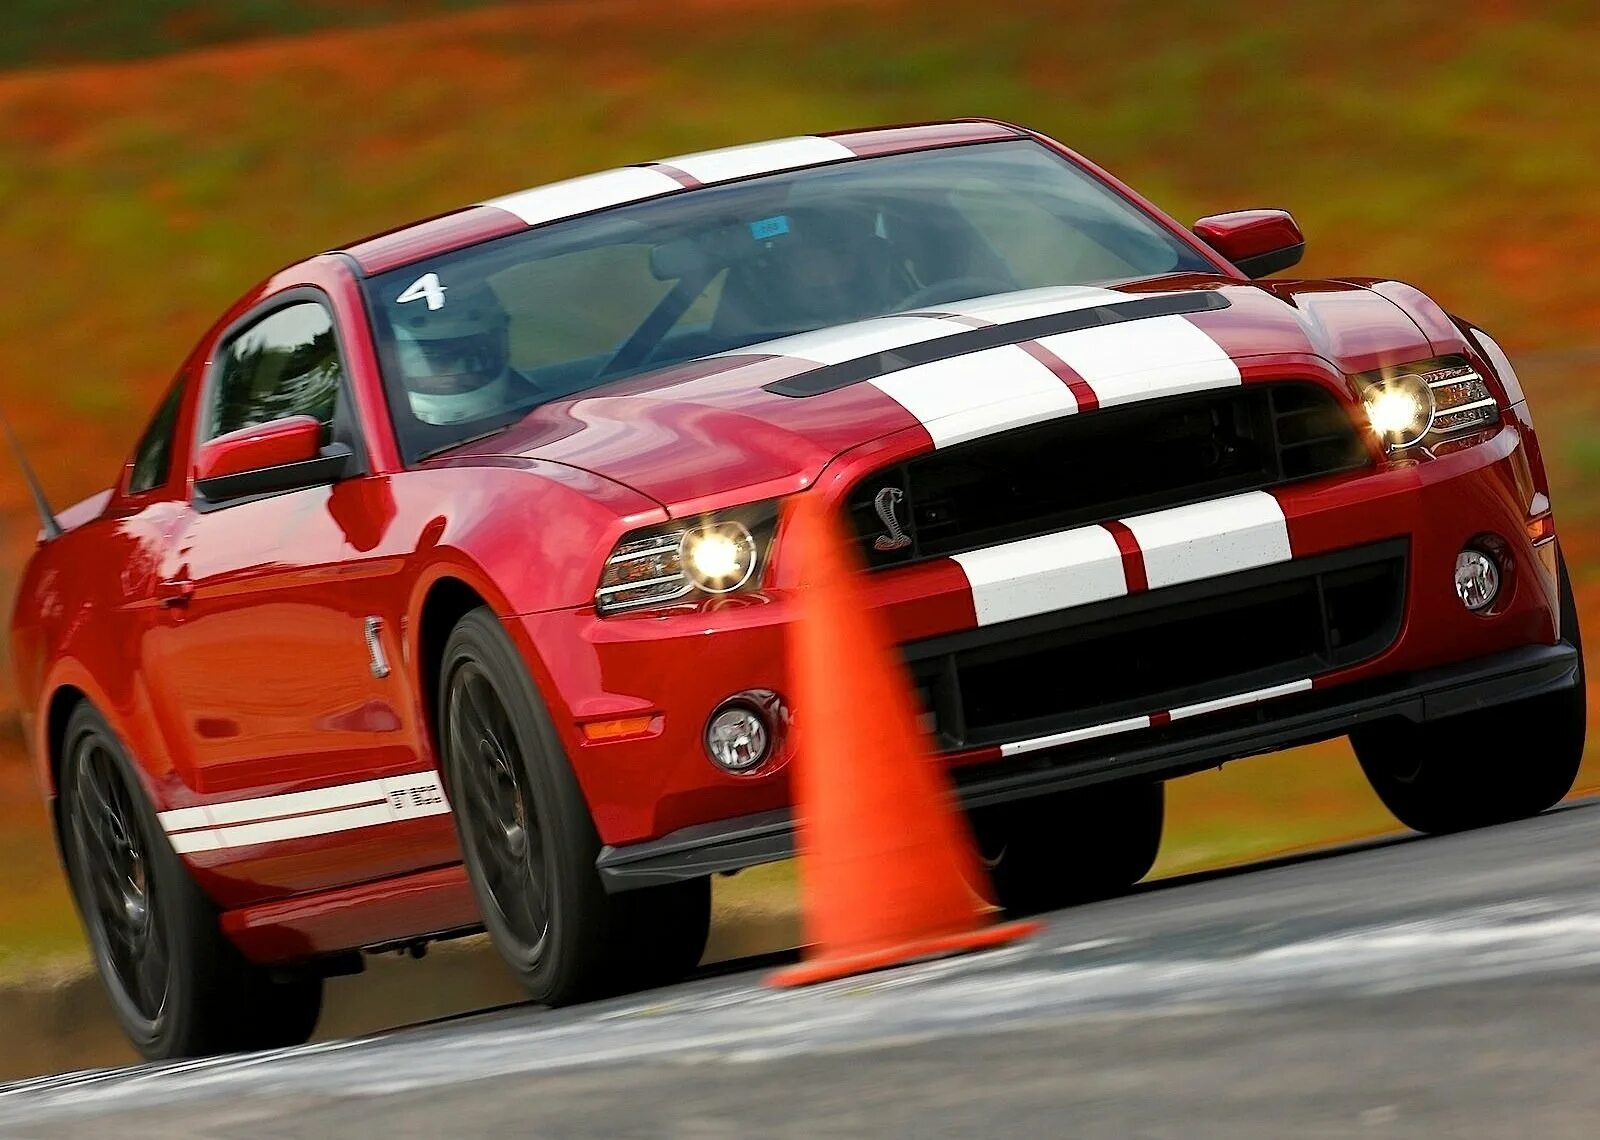 Мустанг джити. Форд Мустанг Шелби gt 500 2013. Форд Мустанг gt 500 Shelby. 2013 Ford Shelby Mustang gt. Ford Shelby gt500 2013.